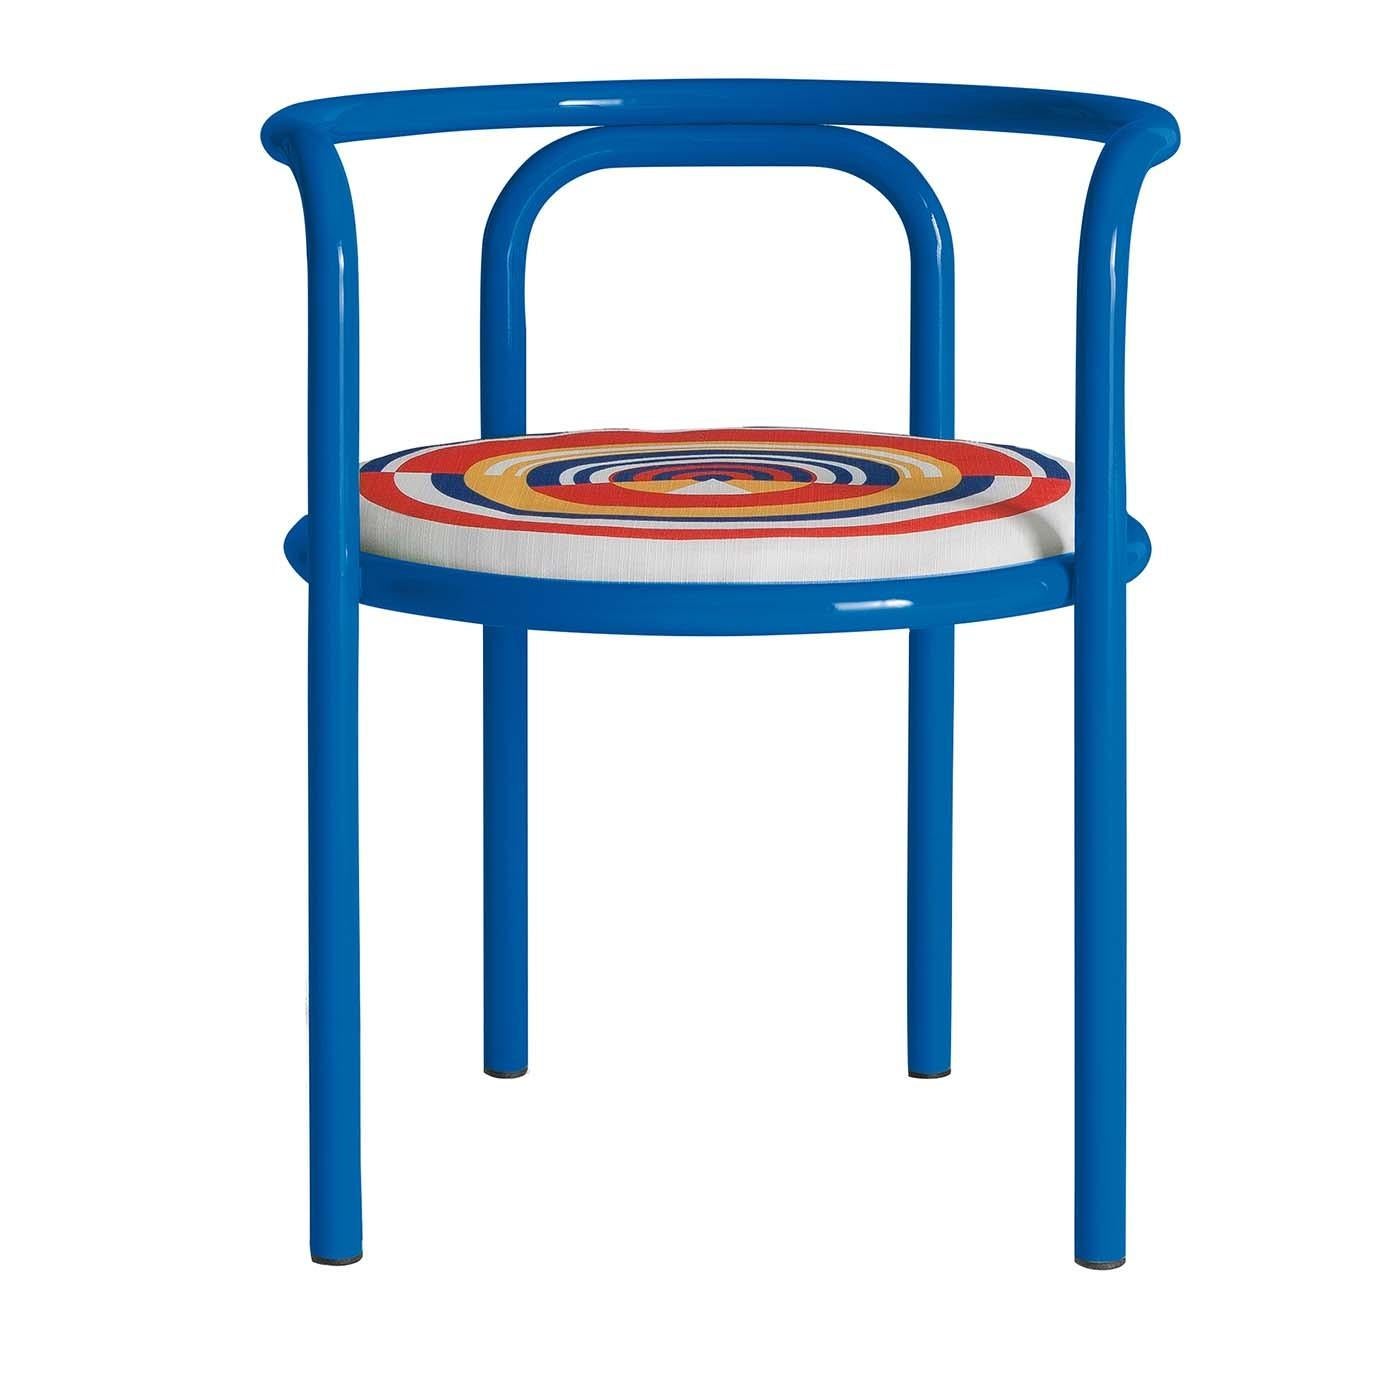 This chair will be the heart of a patio, garden, or veranda imparting a colorful, contemporary aesthetic to any outdoor setting. Showcasing a sinuous silhouette, the tubular steel frame with a rounded back and integrated arms boasts a bright blue